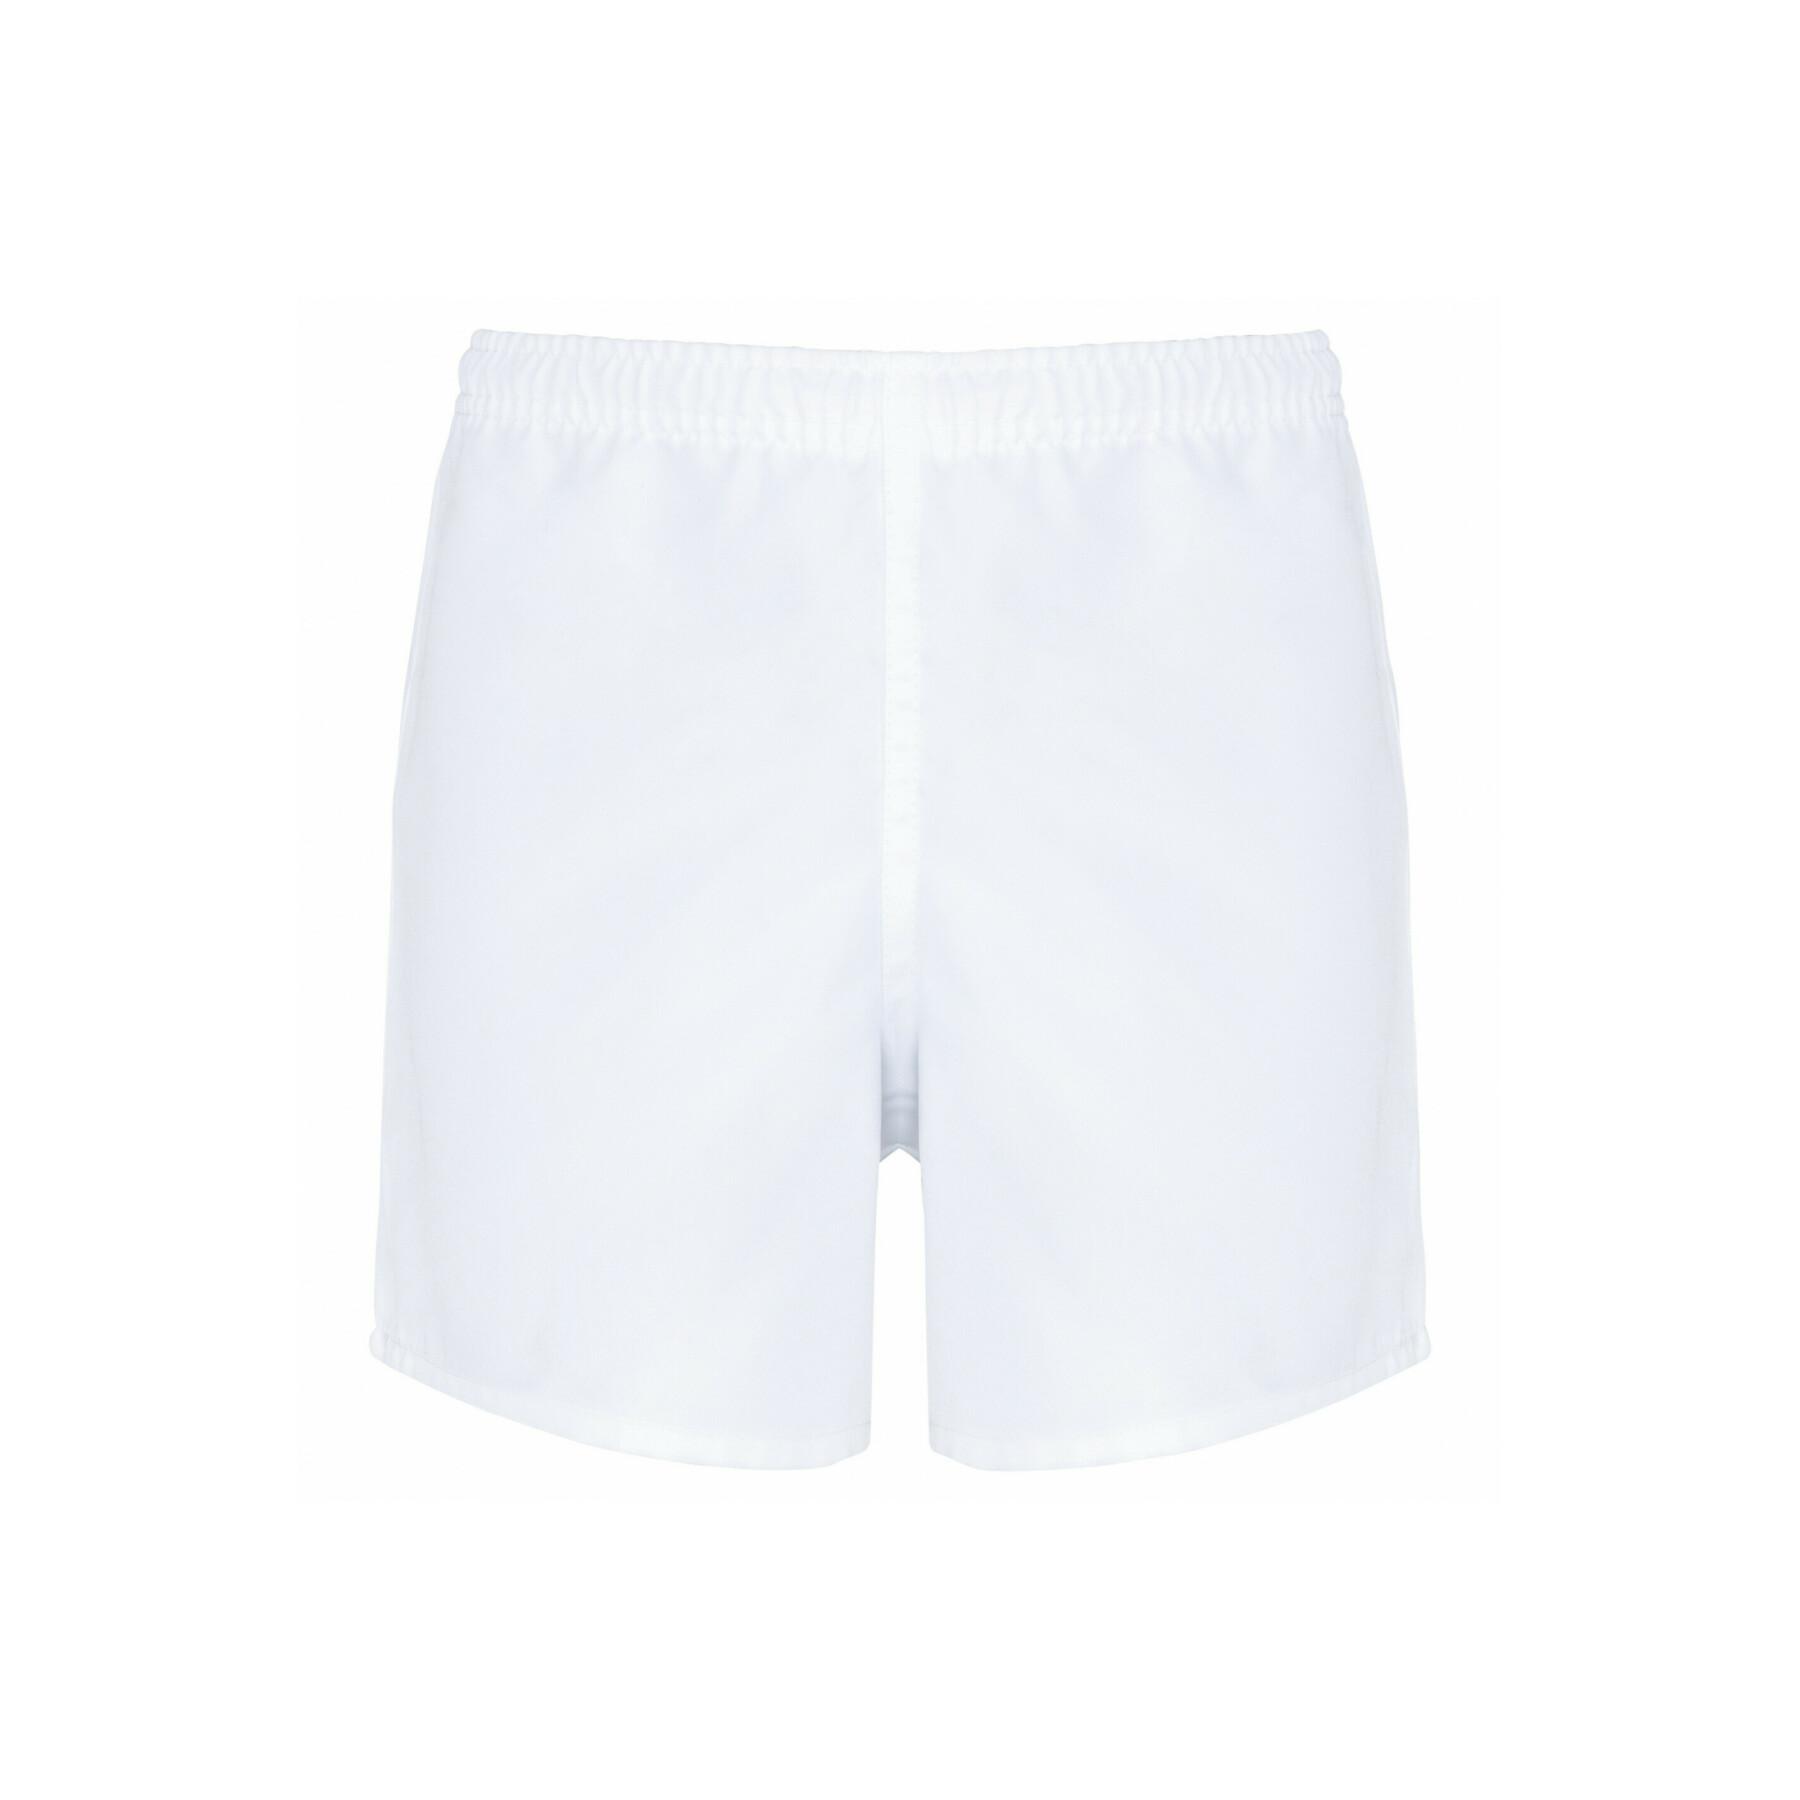 Proact Short Enfant Rugby 